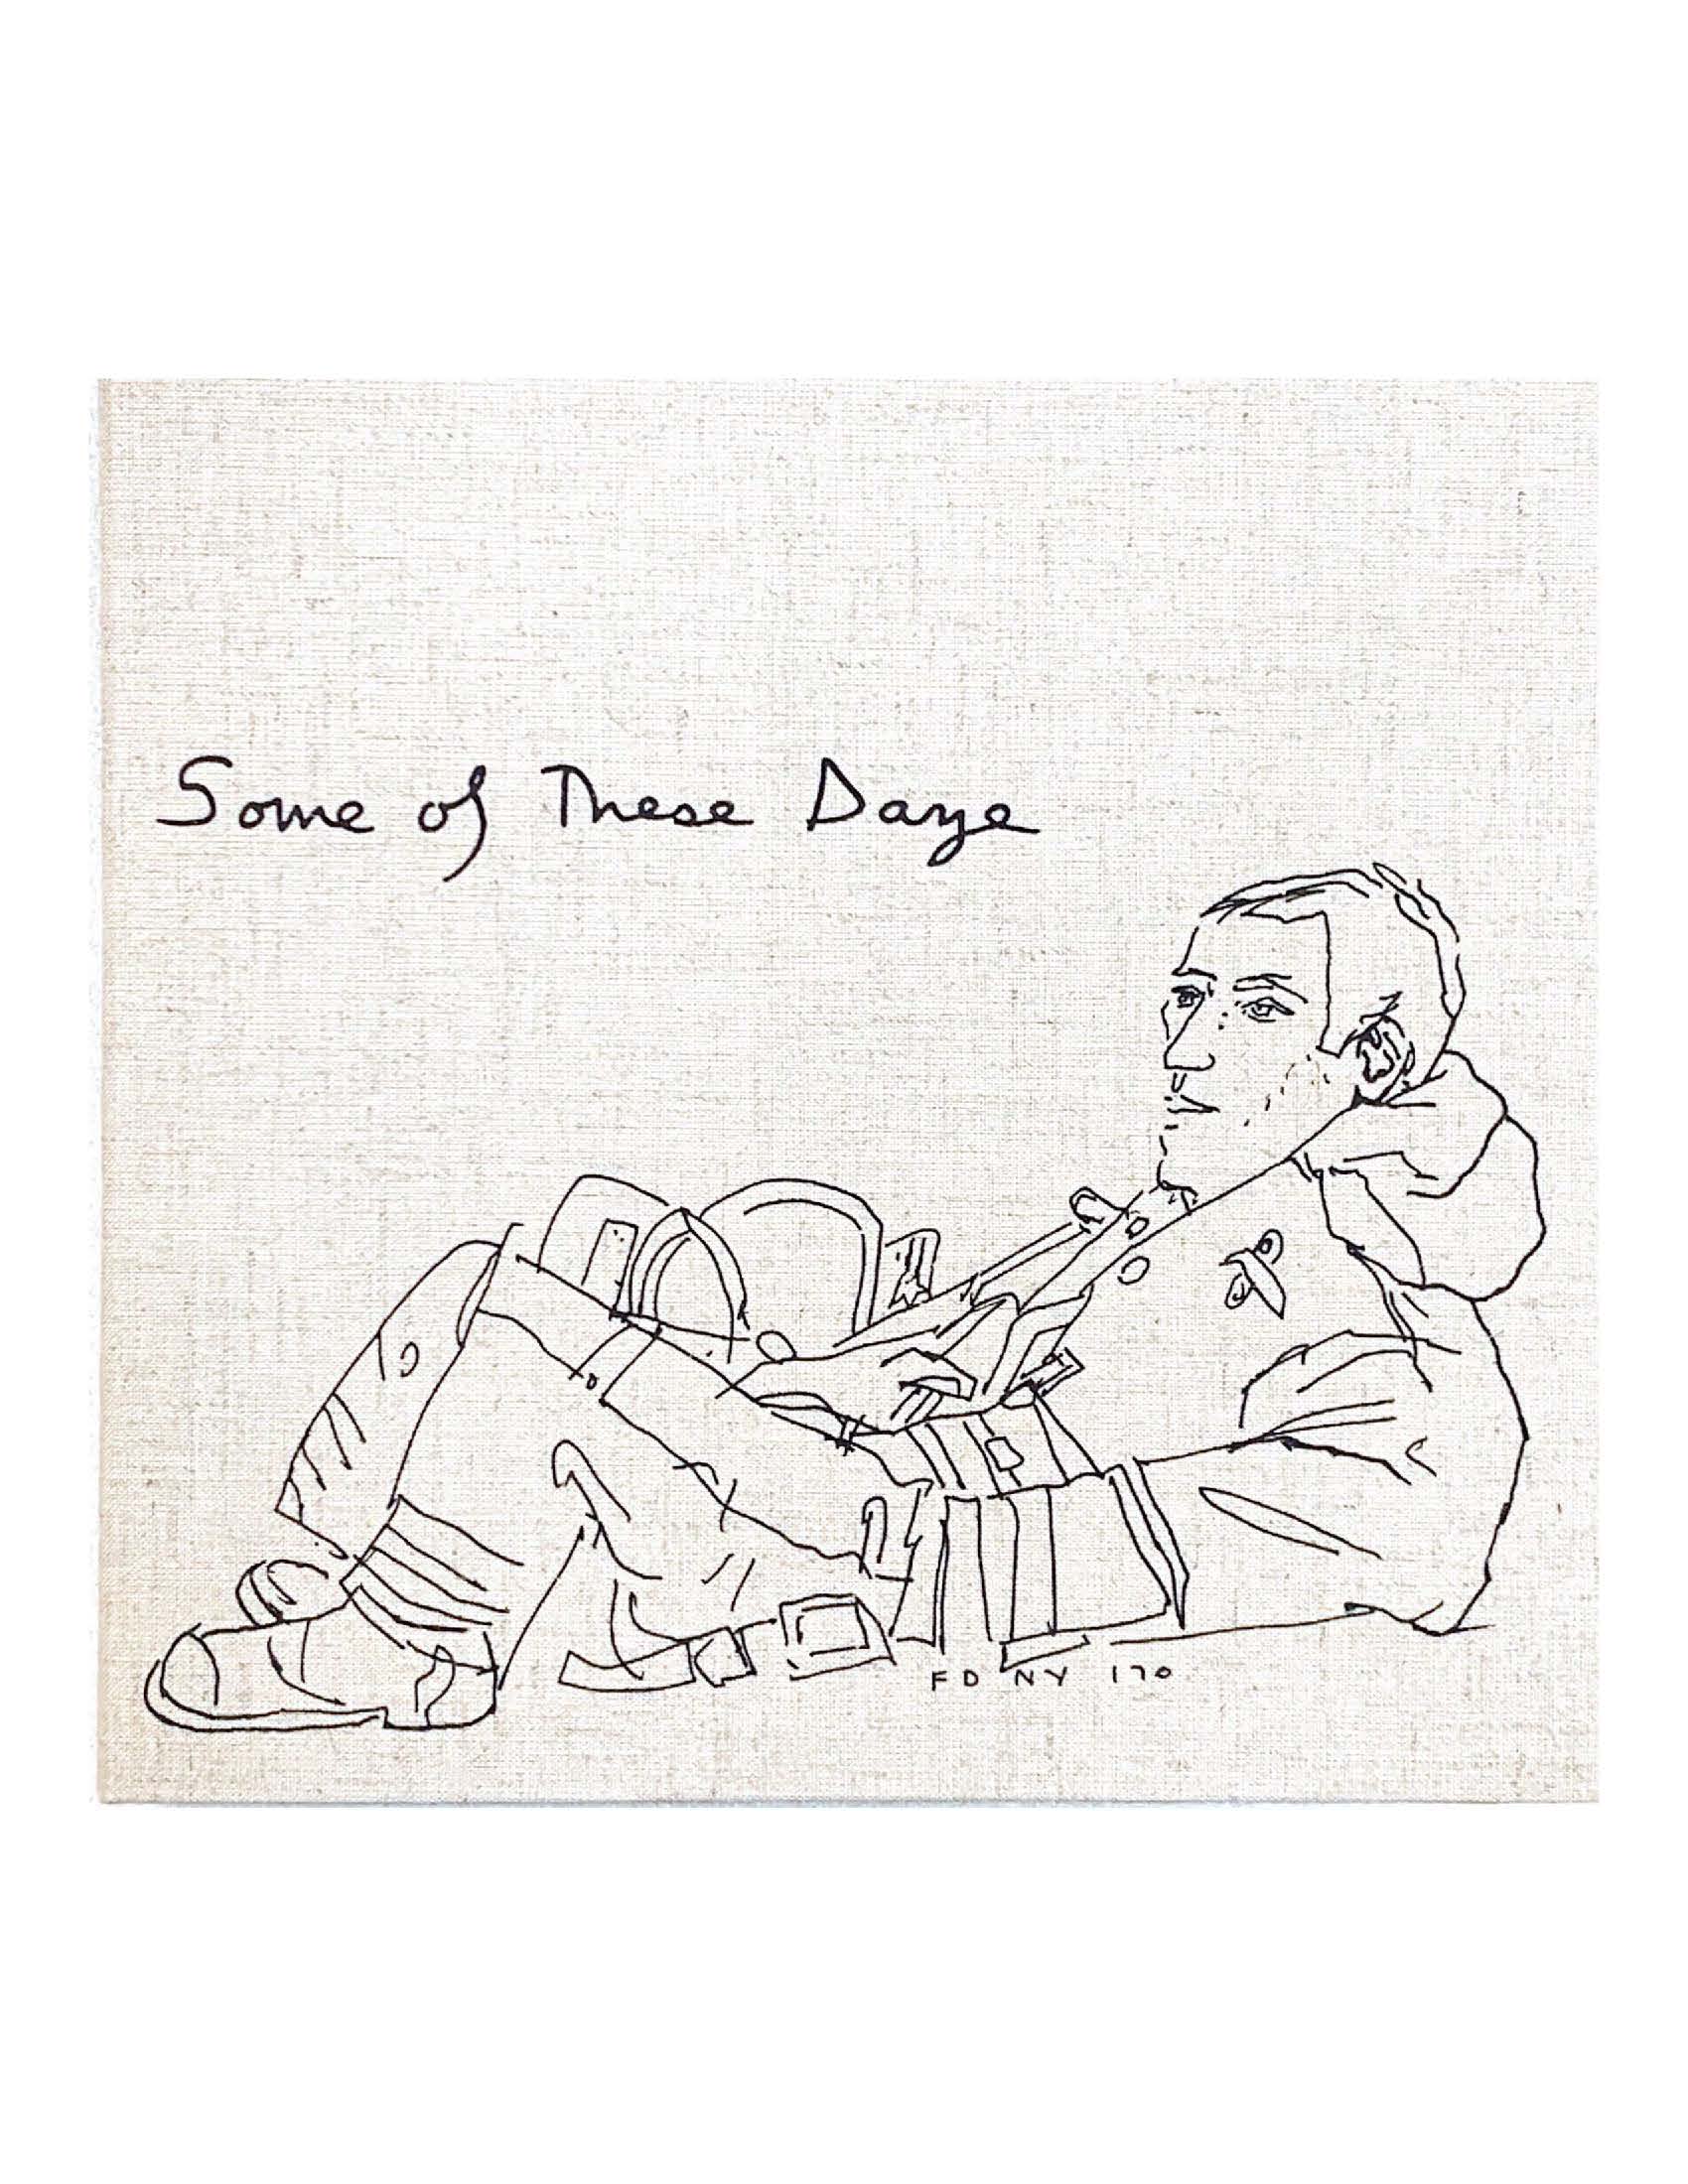 Front cover of “Some of these Daze” by Mimi Gross and Charles Bernstein, published in 2005